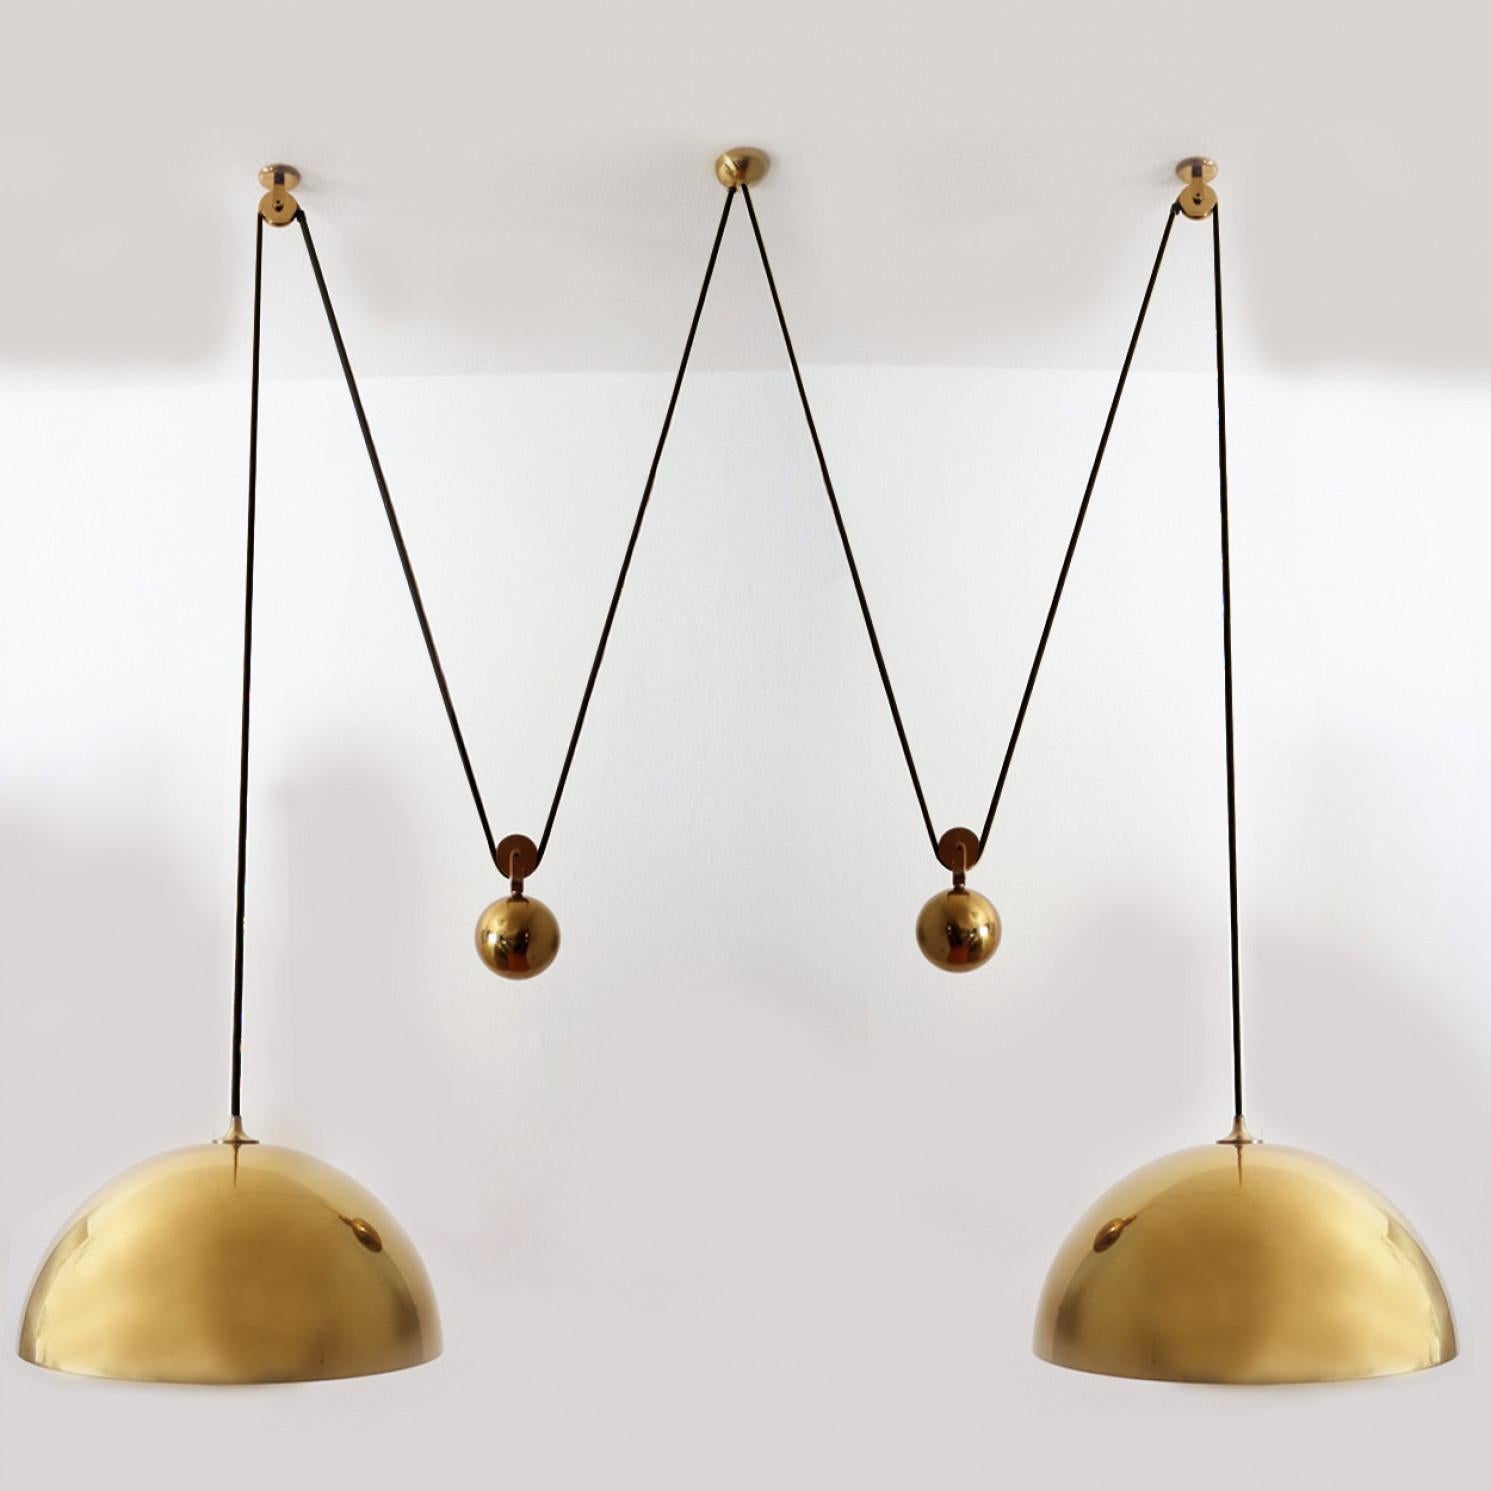 Fantastic Double Pull pendant light by Florian Schulz, Germany, Europe. Design period: 1970-1979, production period: 2022.

Two brass polished unlacquered pendants suspended with their own brass ball counter balance. One canopy supports both